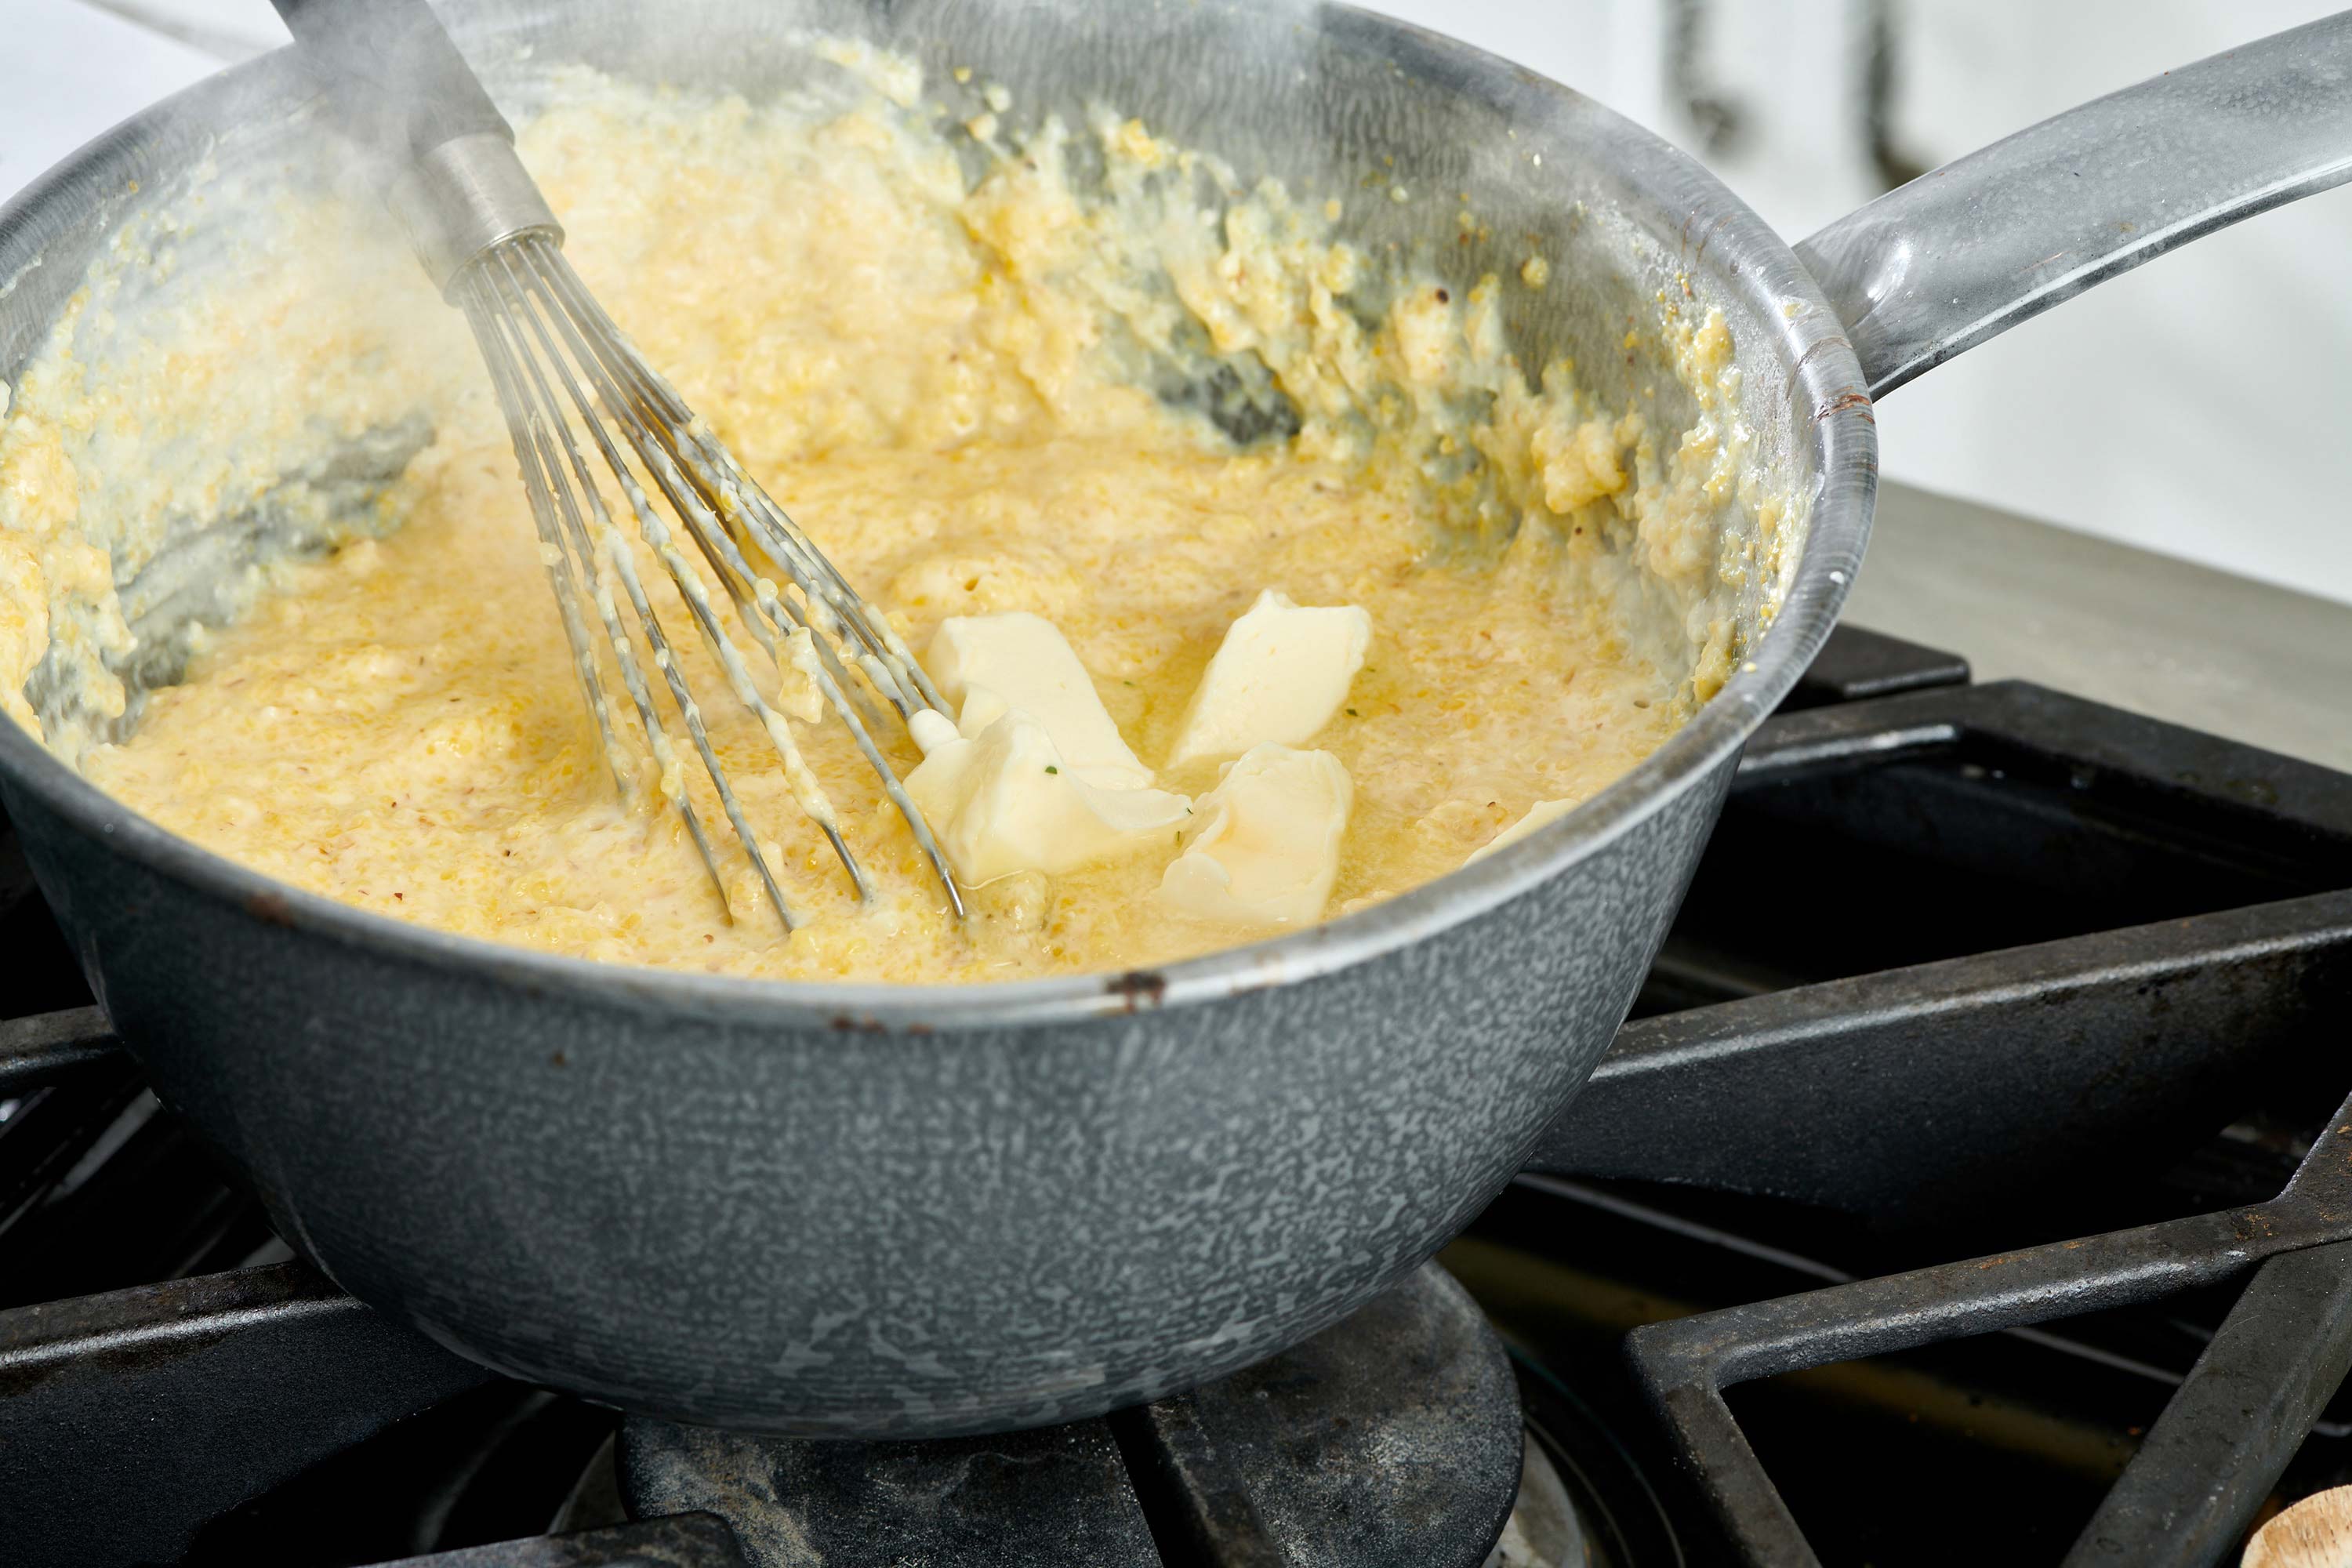 Chunks of butter in a pan of grits with a whisk.